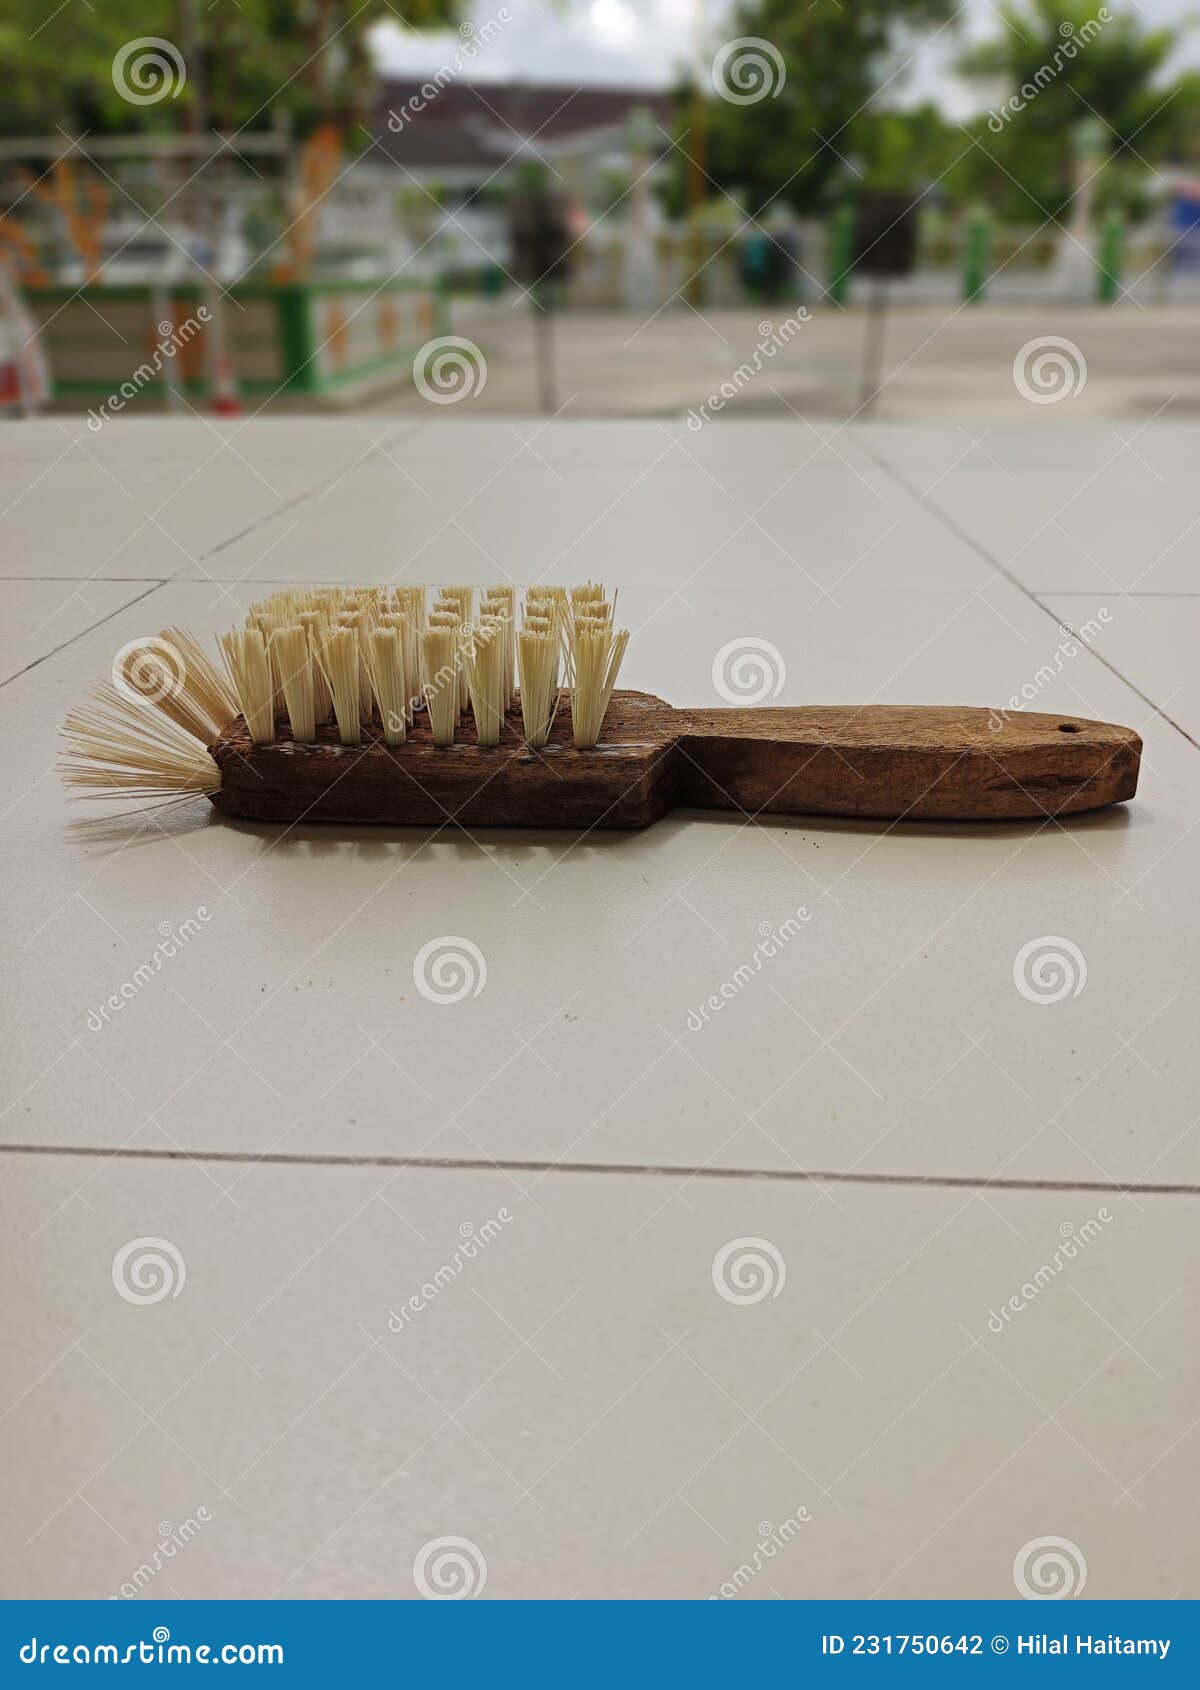 Old Bathroom Brush, Strong String, Used, Wooden Handle Stock Photo - Image  of produce, strong: 231750642